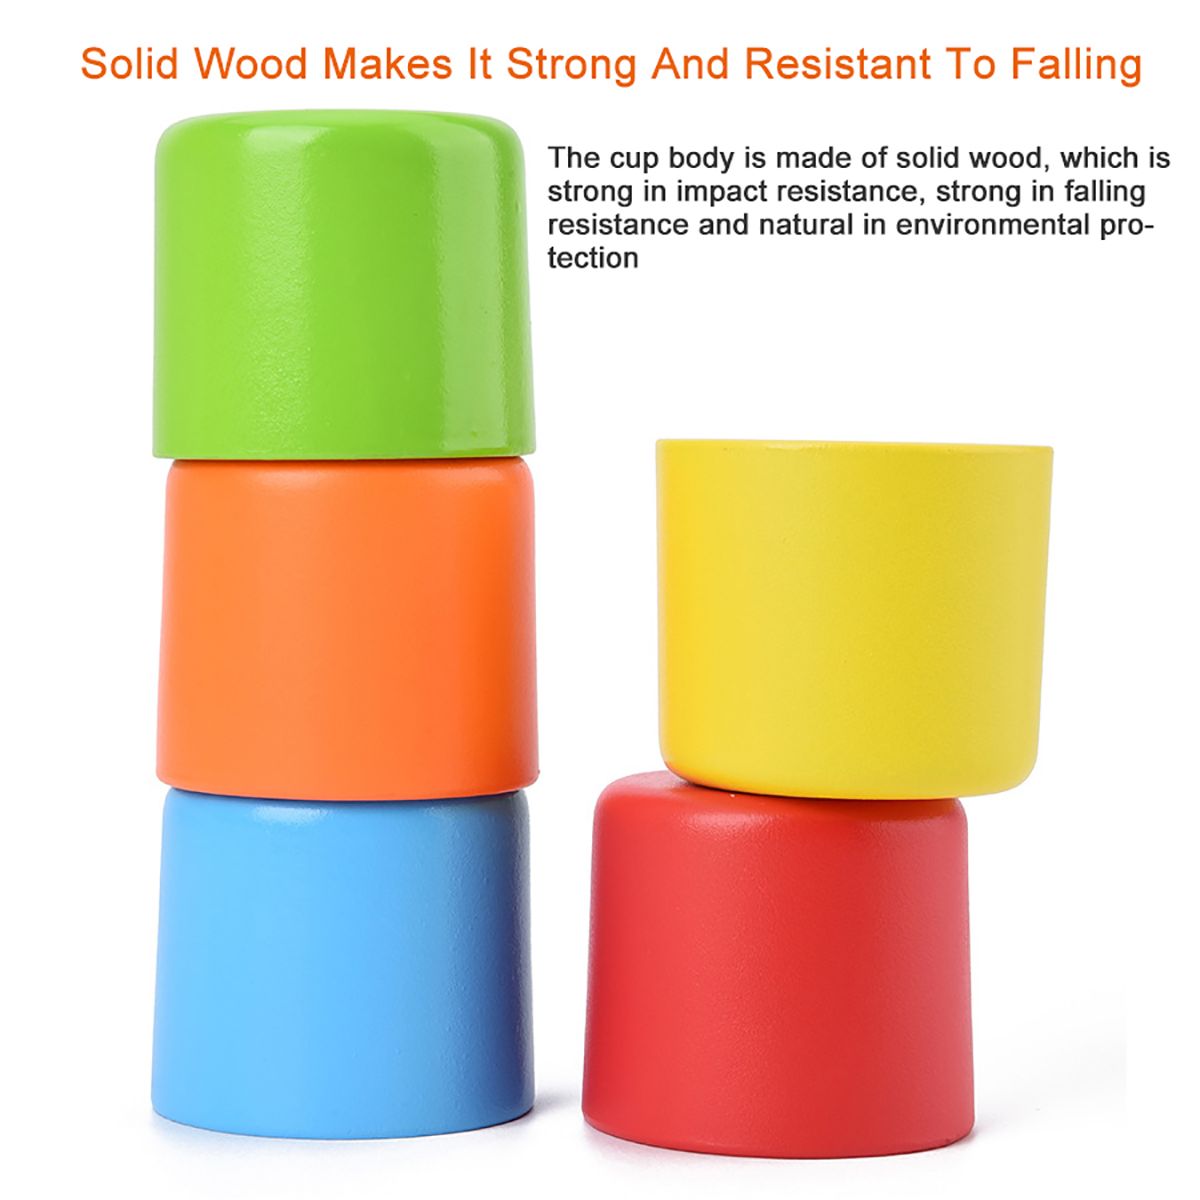 Montessori-Wooden-Color-Classification-Matching-Toys-Sets-Kids-Early-Education-1620677